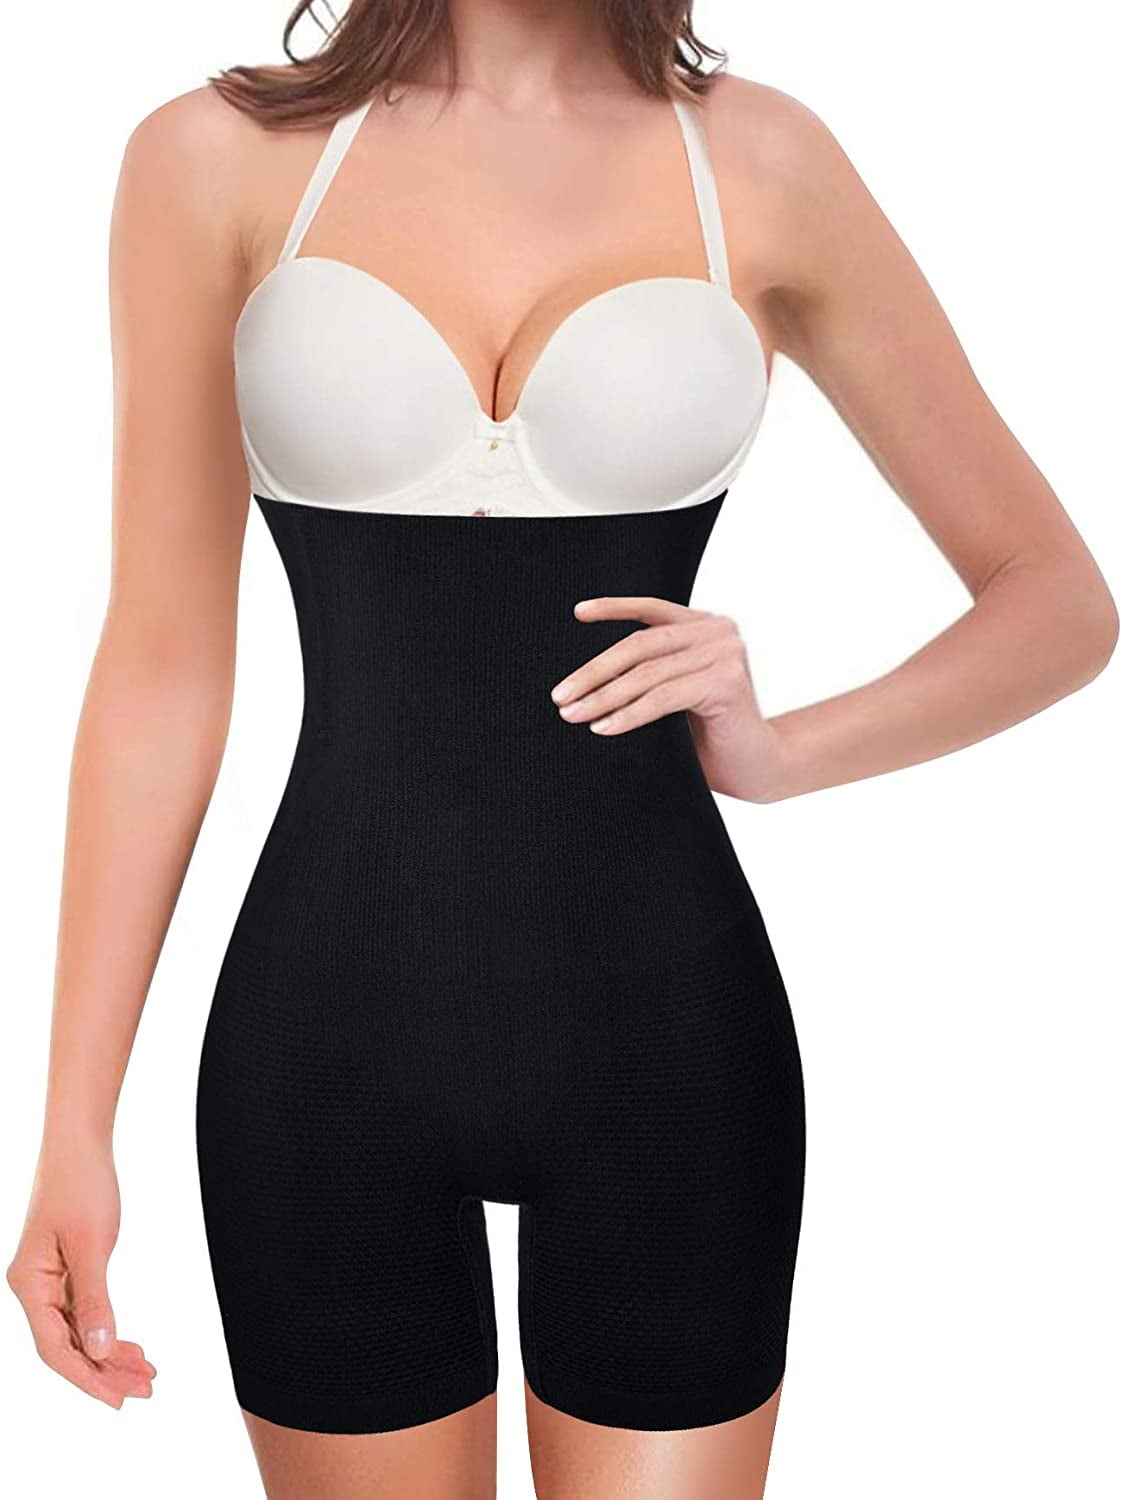 Half Body Shaper for Women Tummy Control Slim and Lifting Shapewear Body  Suit for Ladies High Waist Tummy Tucker Body Shaper for Women Fits 60-120  KG